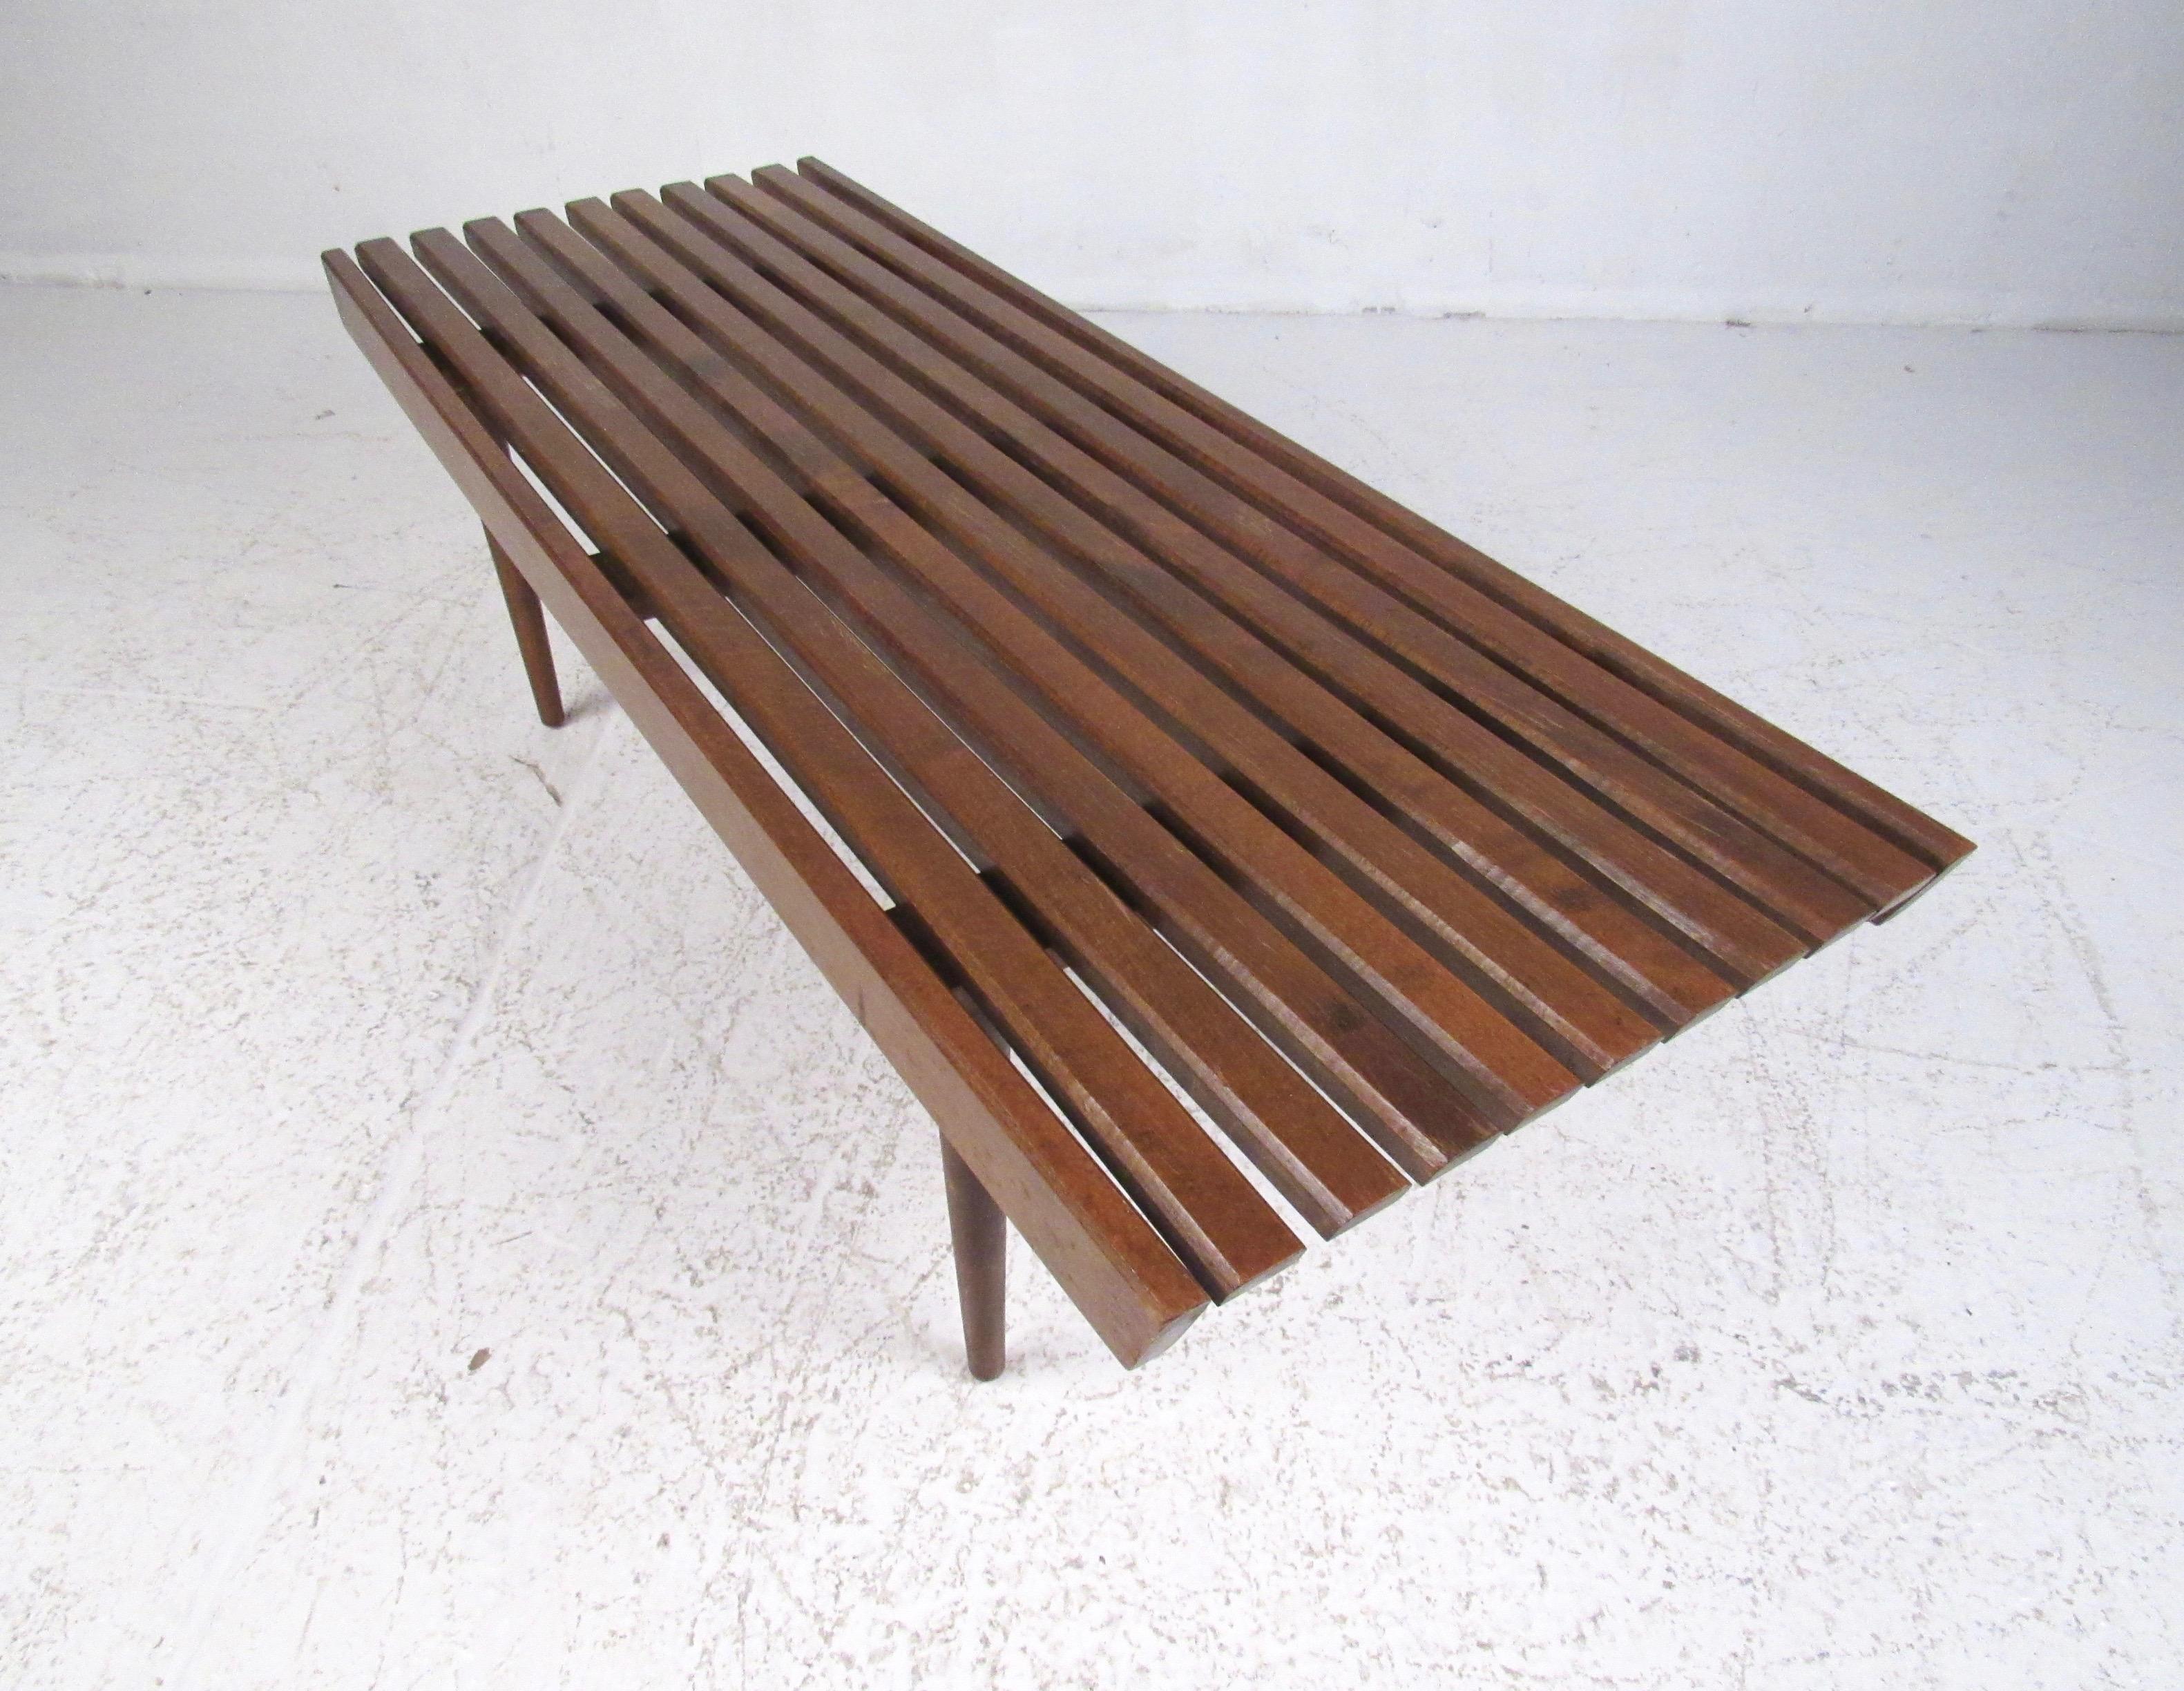 This Mid-Century Modern coffee table features vintage walnut slat construction and tapered removable legs. Simple yet stylish design makes this the perfect piece for use as a bench for occasional seating, or a living room cocktail table. Please